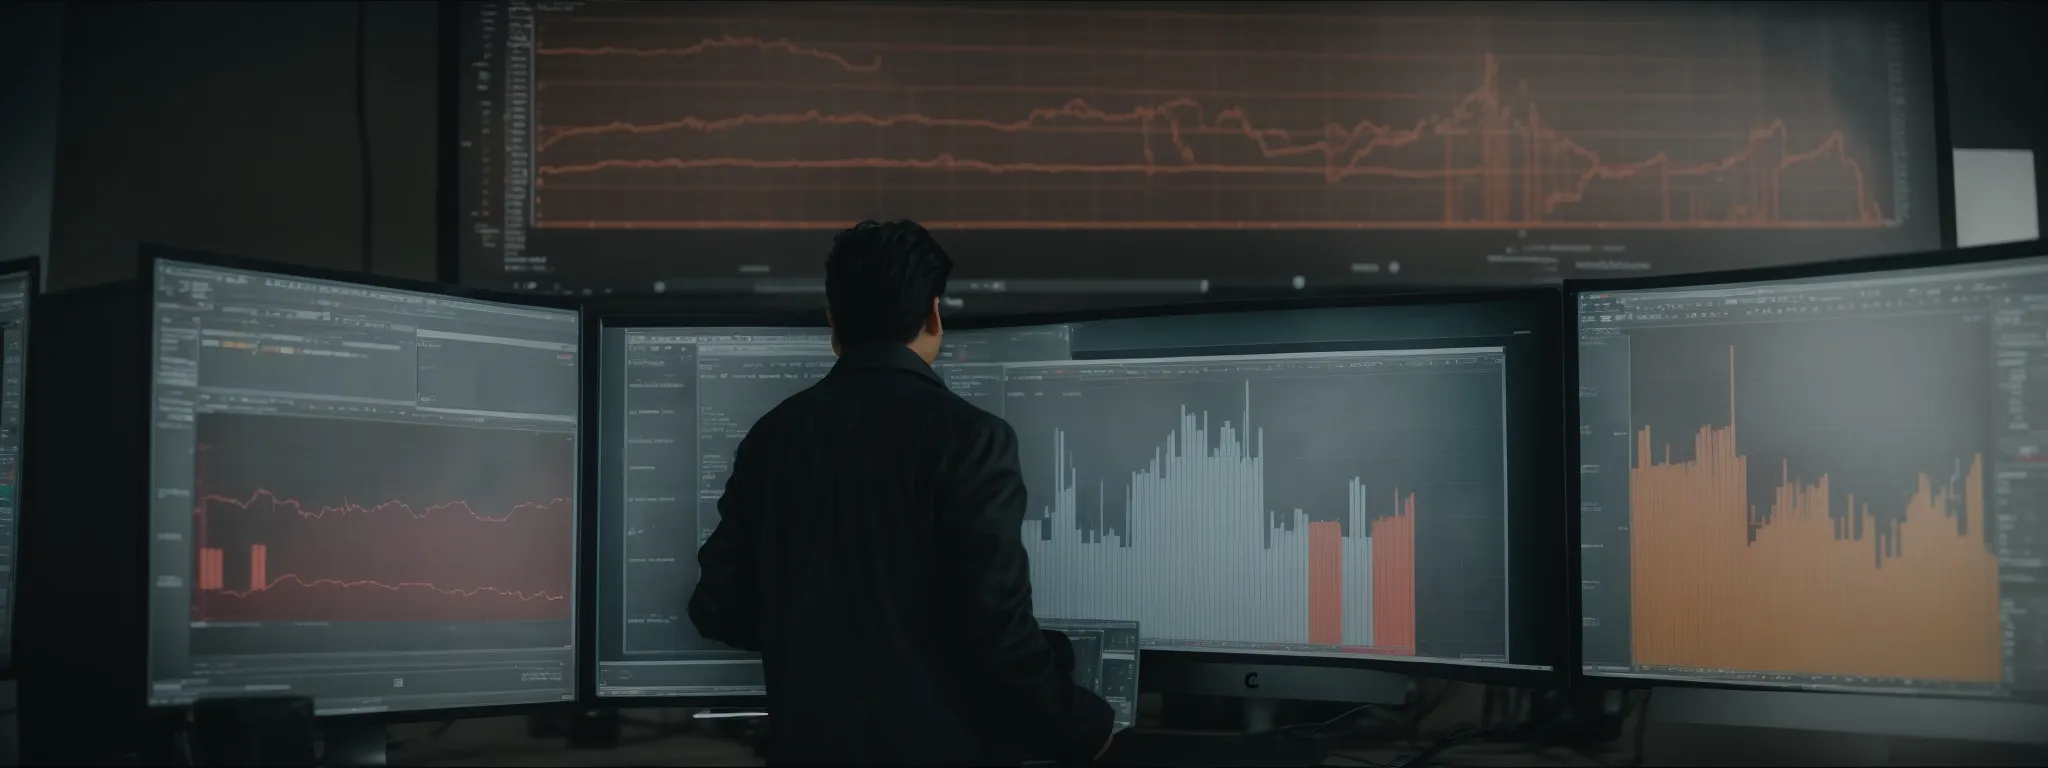 A Person Scrutinizing Complex Graphs And Charts Displayed On A Large Monitor In A Modern Office.